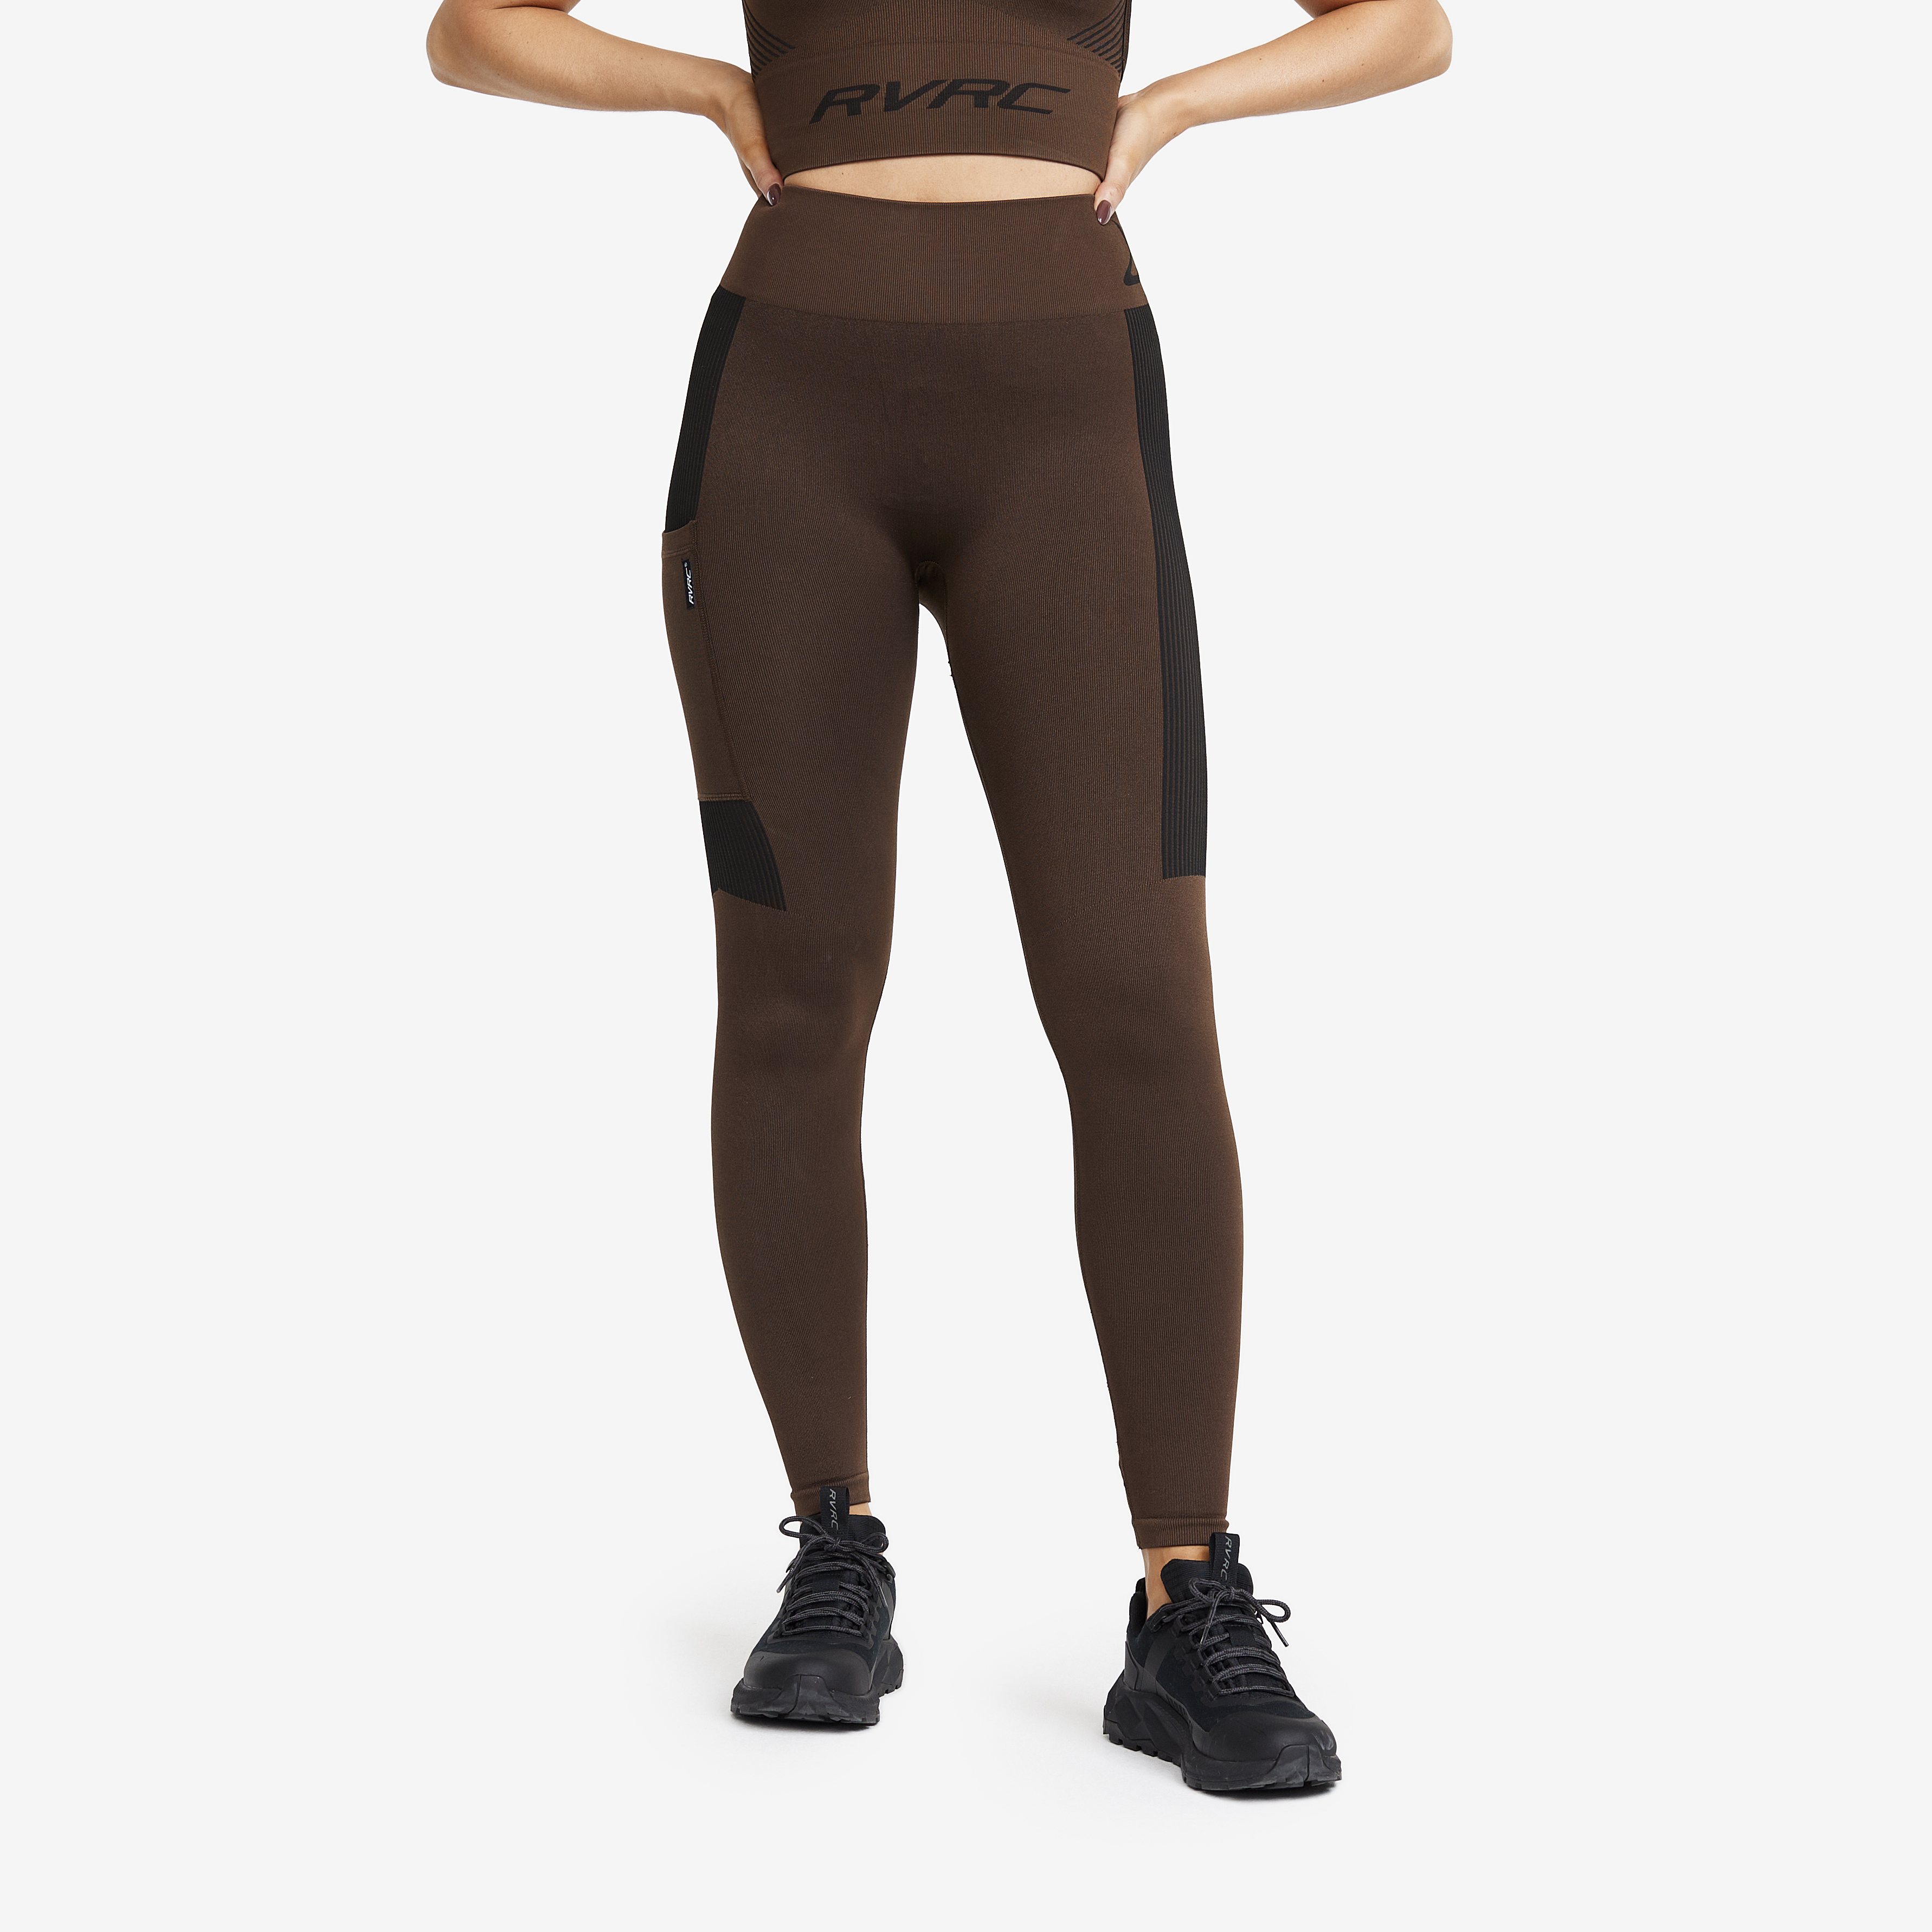 Descent Seamless Tights Chocolate Chip Mujeres